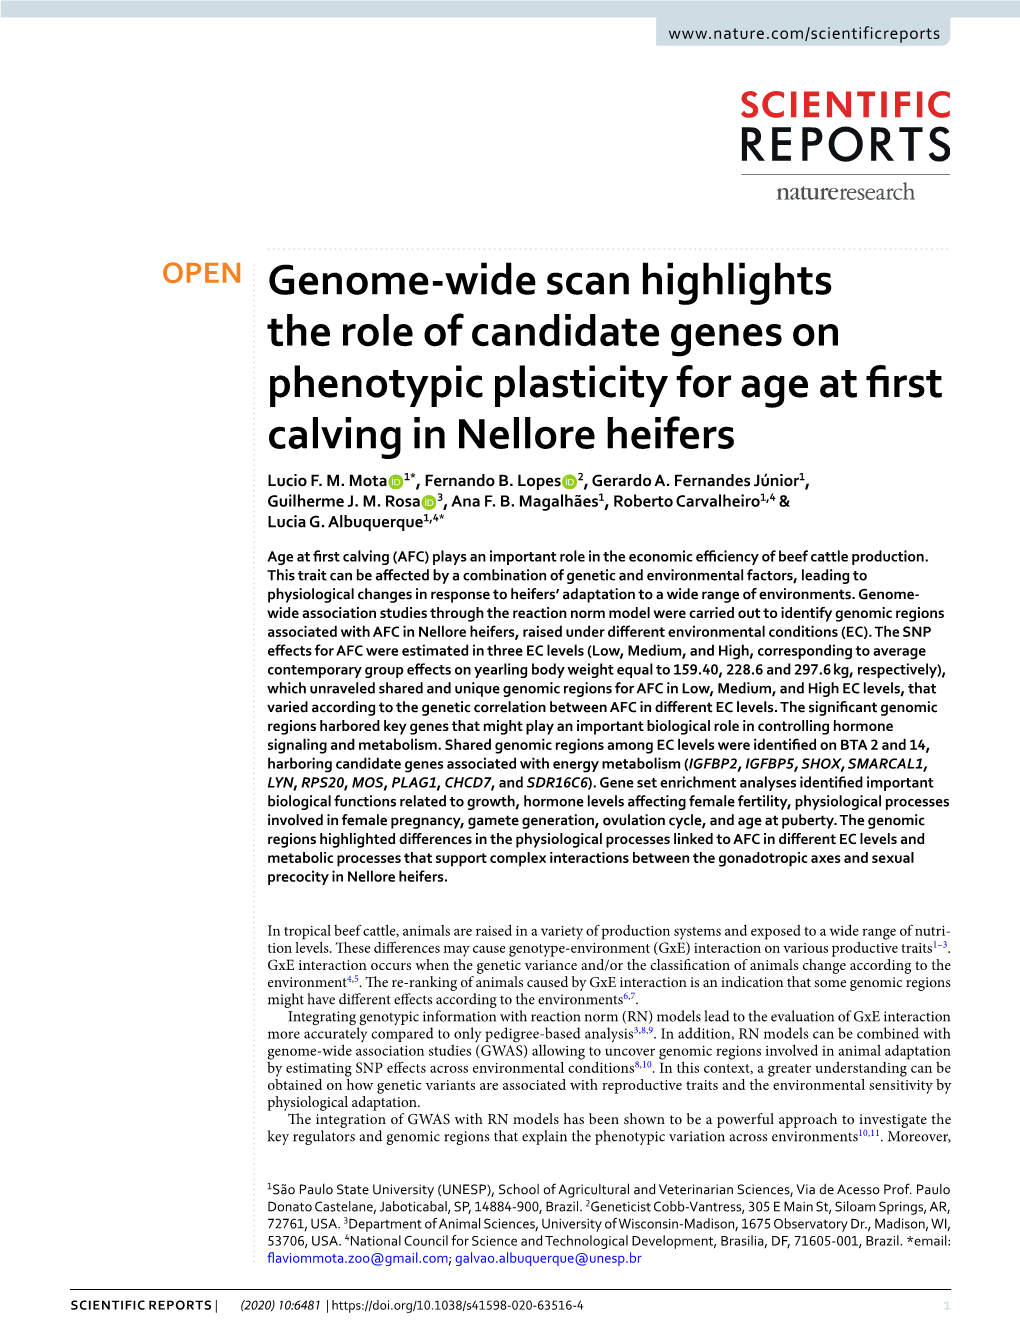 Genome-Wide Scan Highlights the Role of Candidate Genes on Phenotypic Plasticity for Age at Frst Calving in Nellore Heifers Lucio F